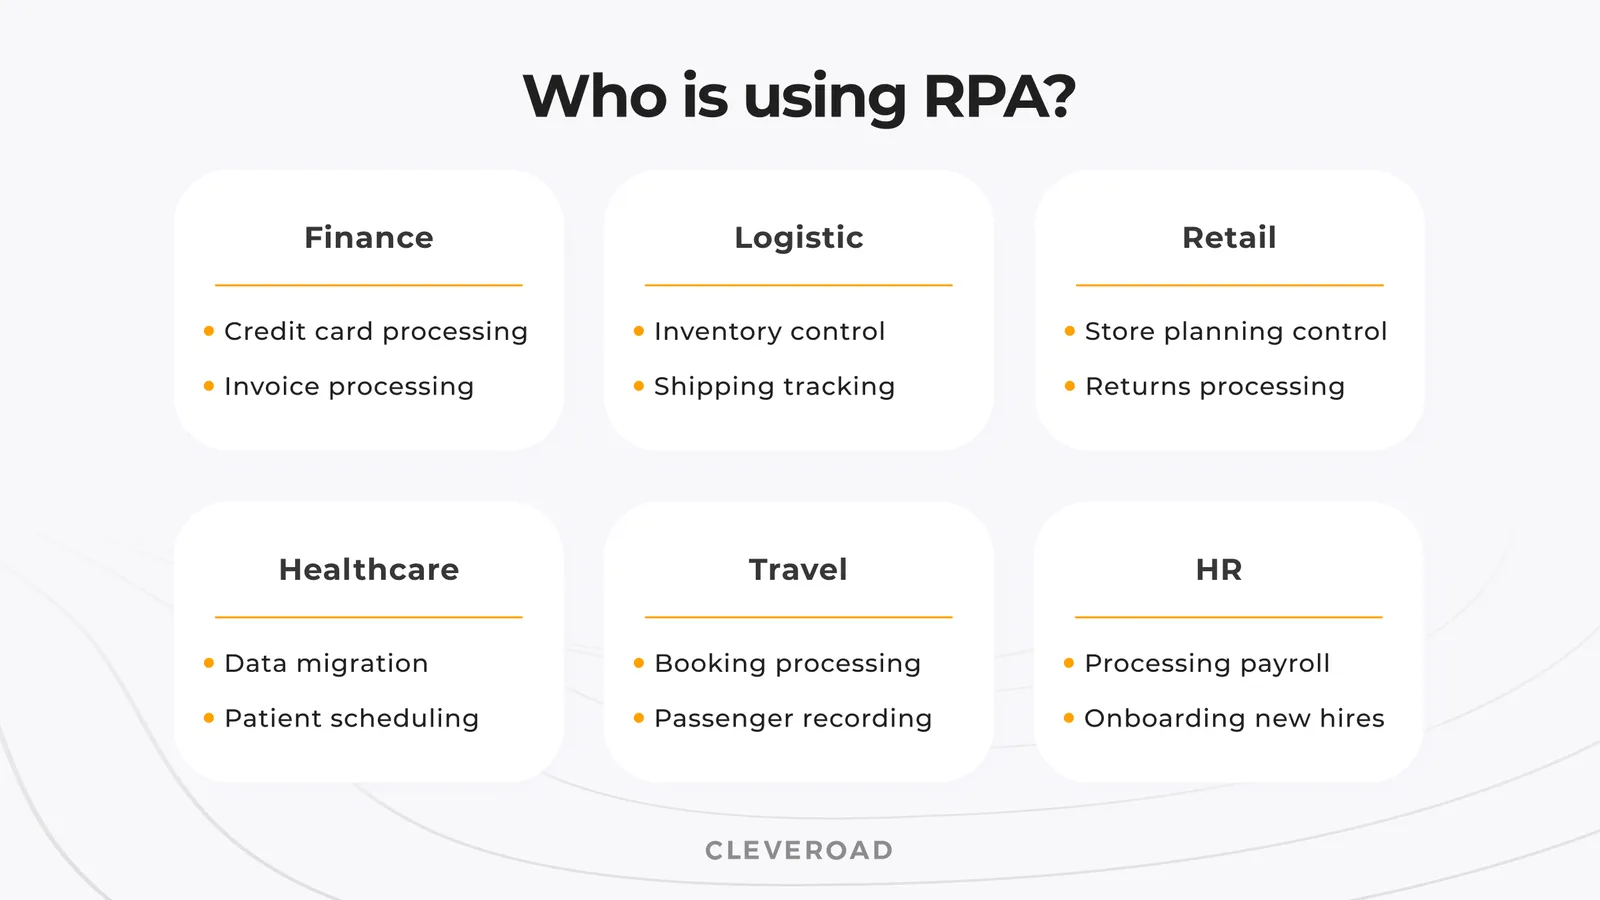 Industries that use RPA solutions